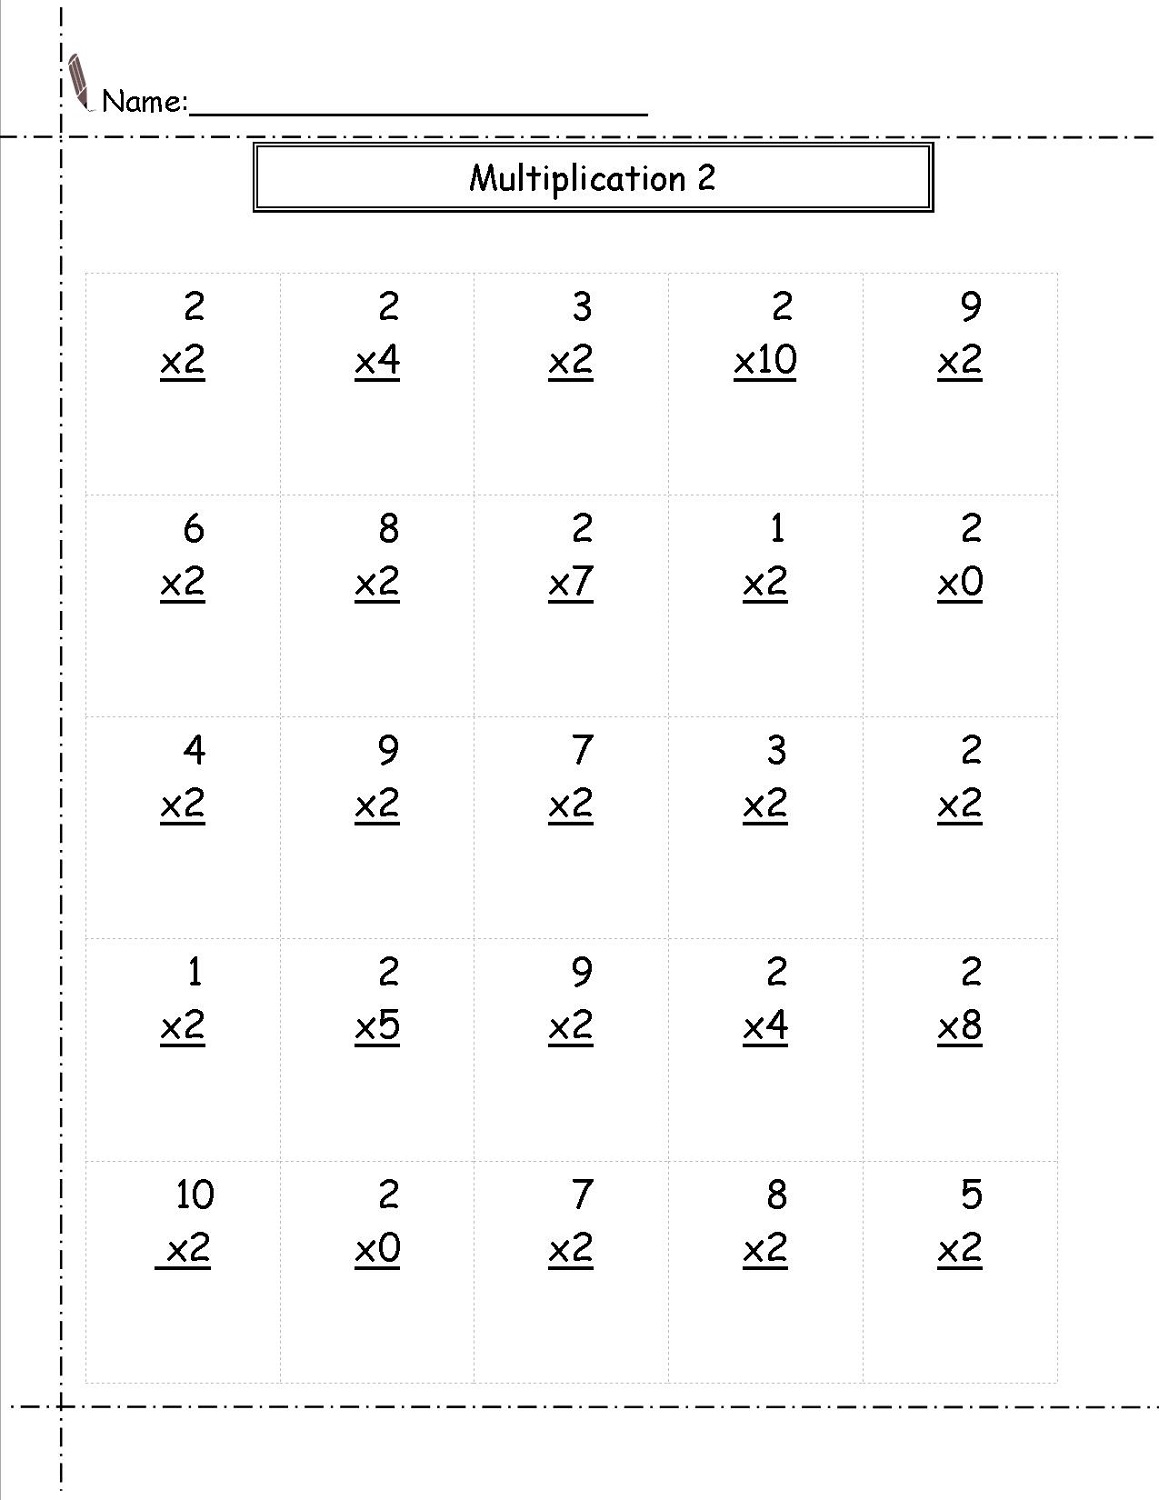 2 times tables worksheets printable